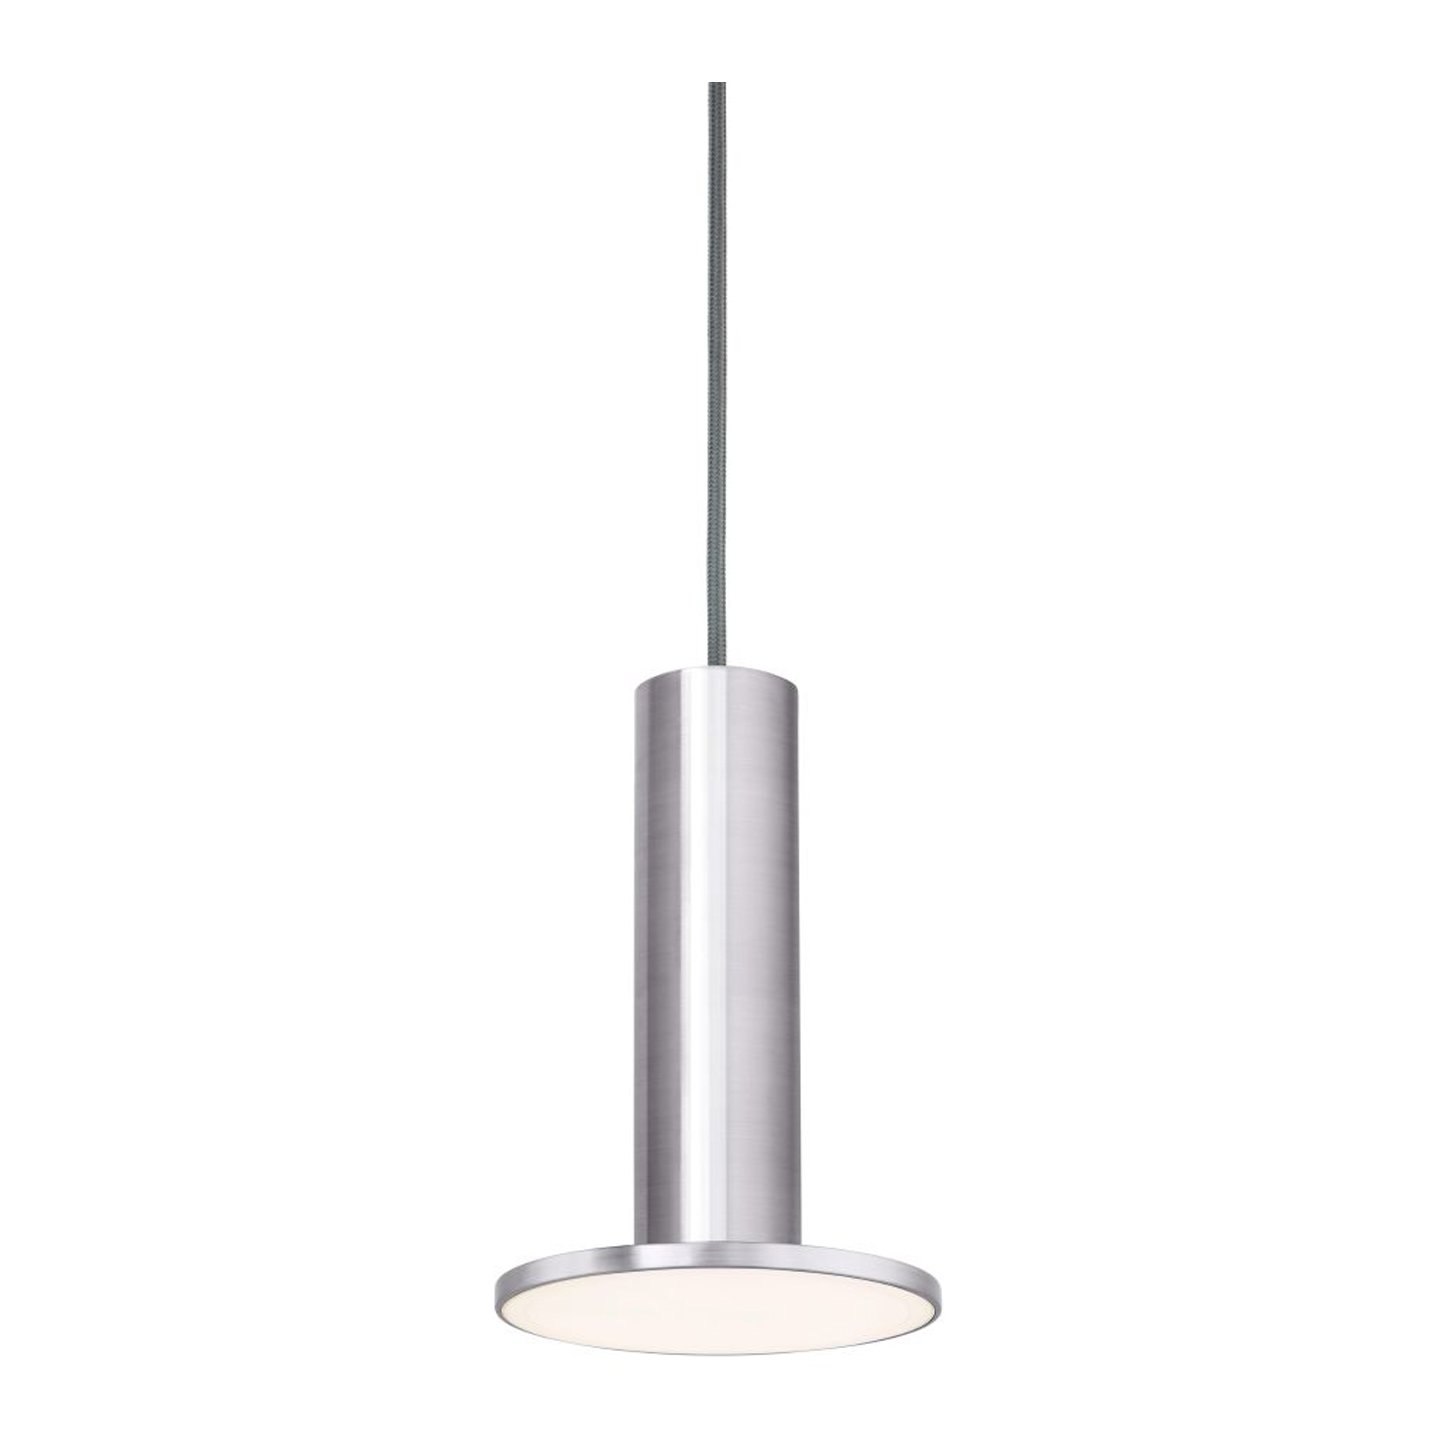 Haworth Cielo Lighting in premium trim with wire from above